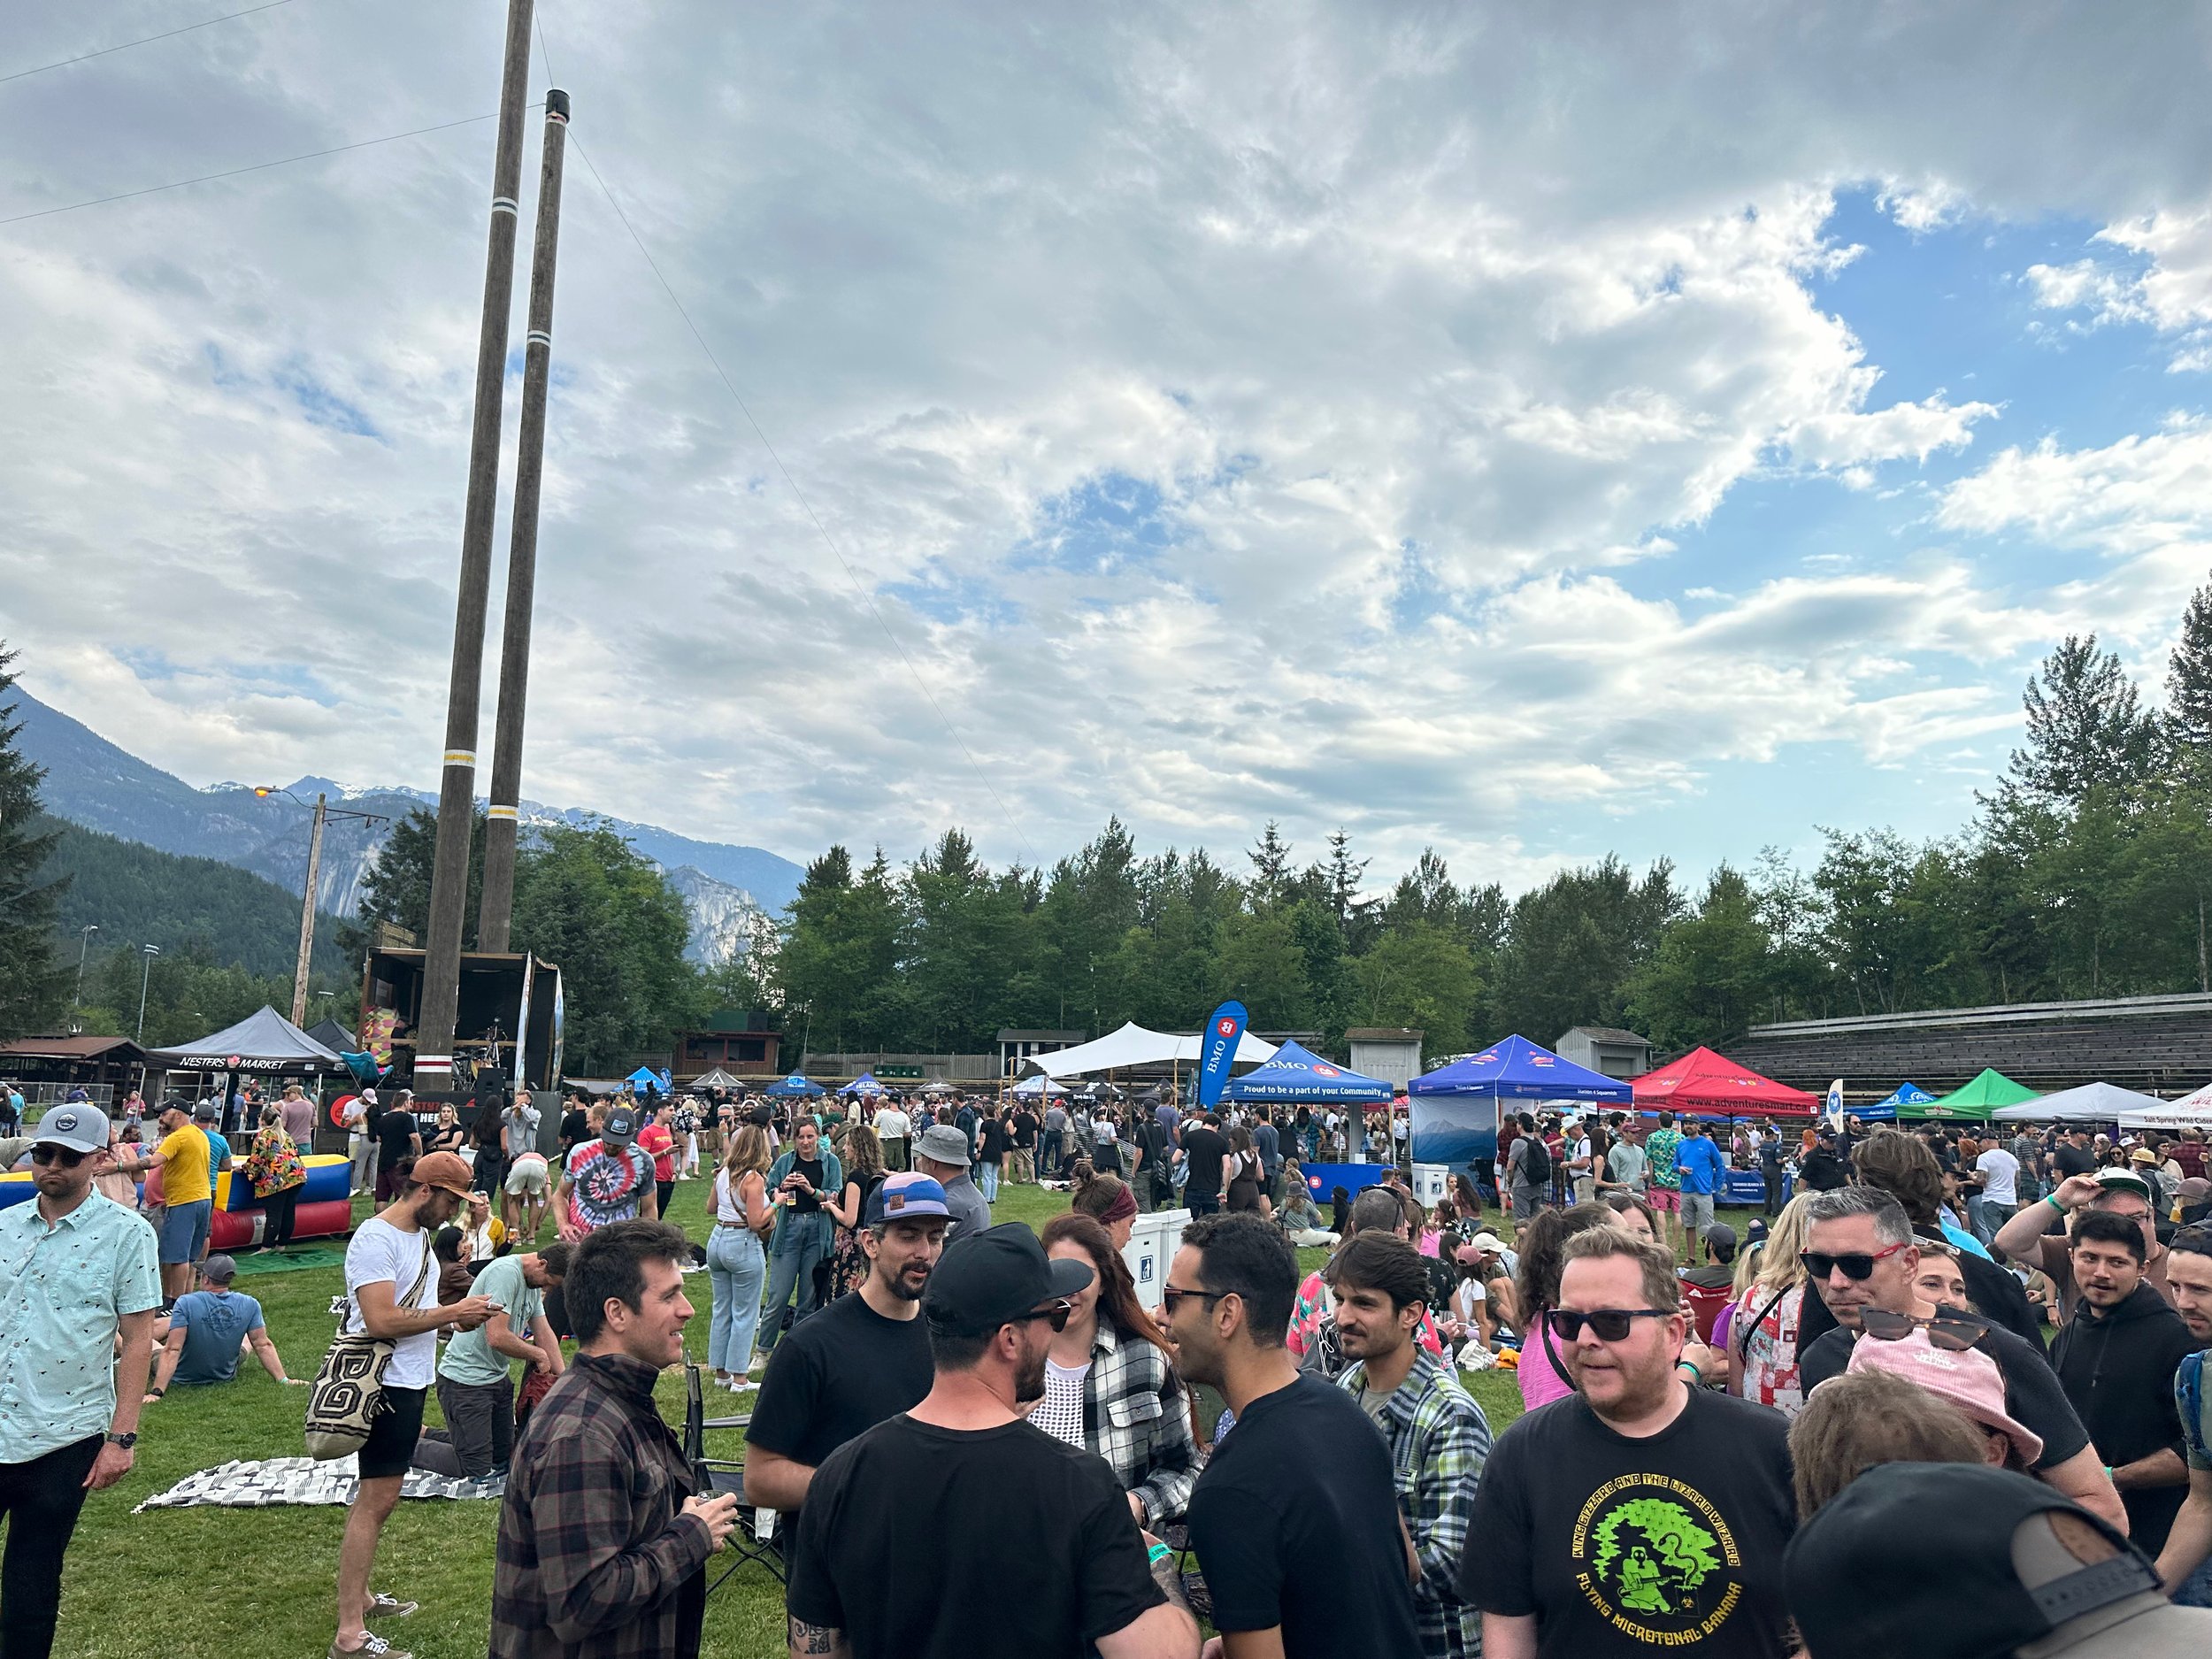  There were 20+ breweries at the festival. Most were ones that we knew, but there were a couple of new ones.  